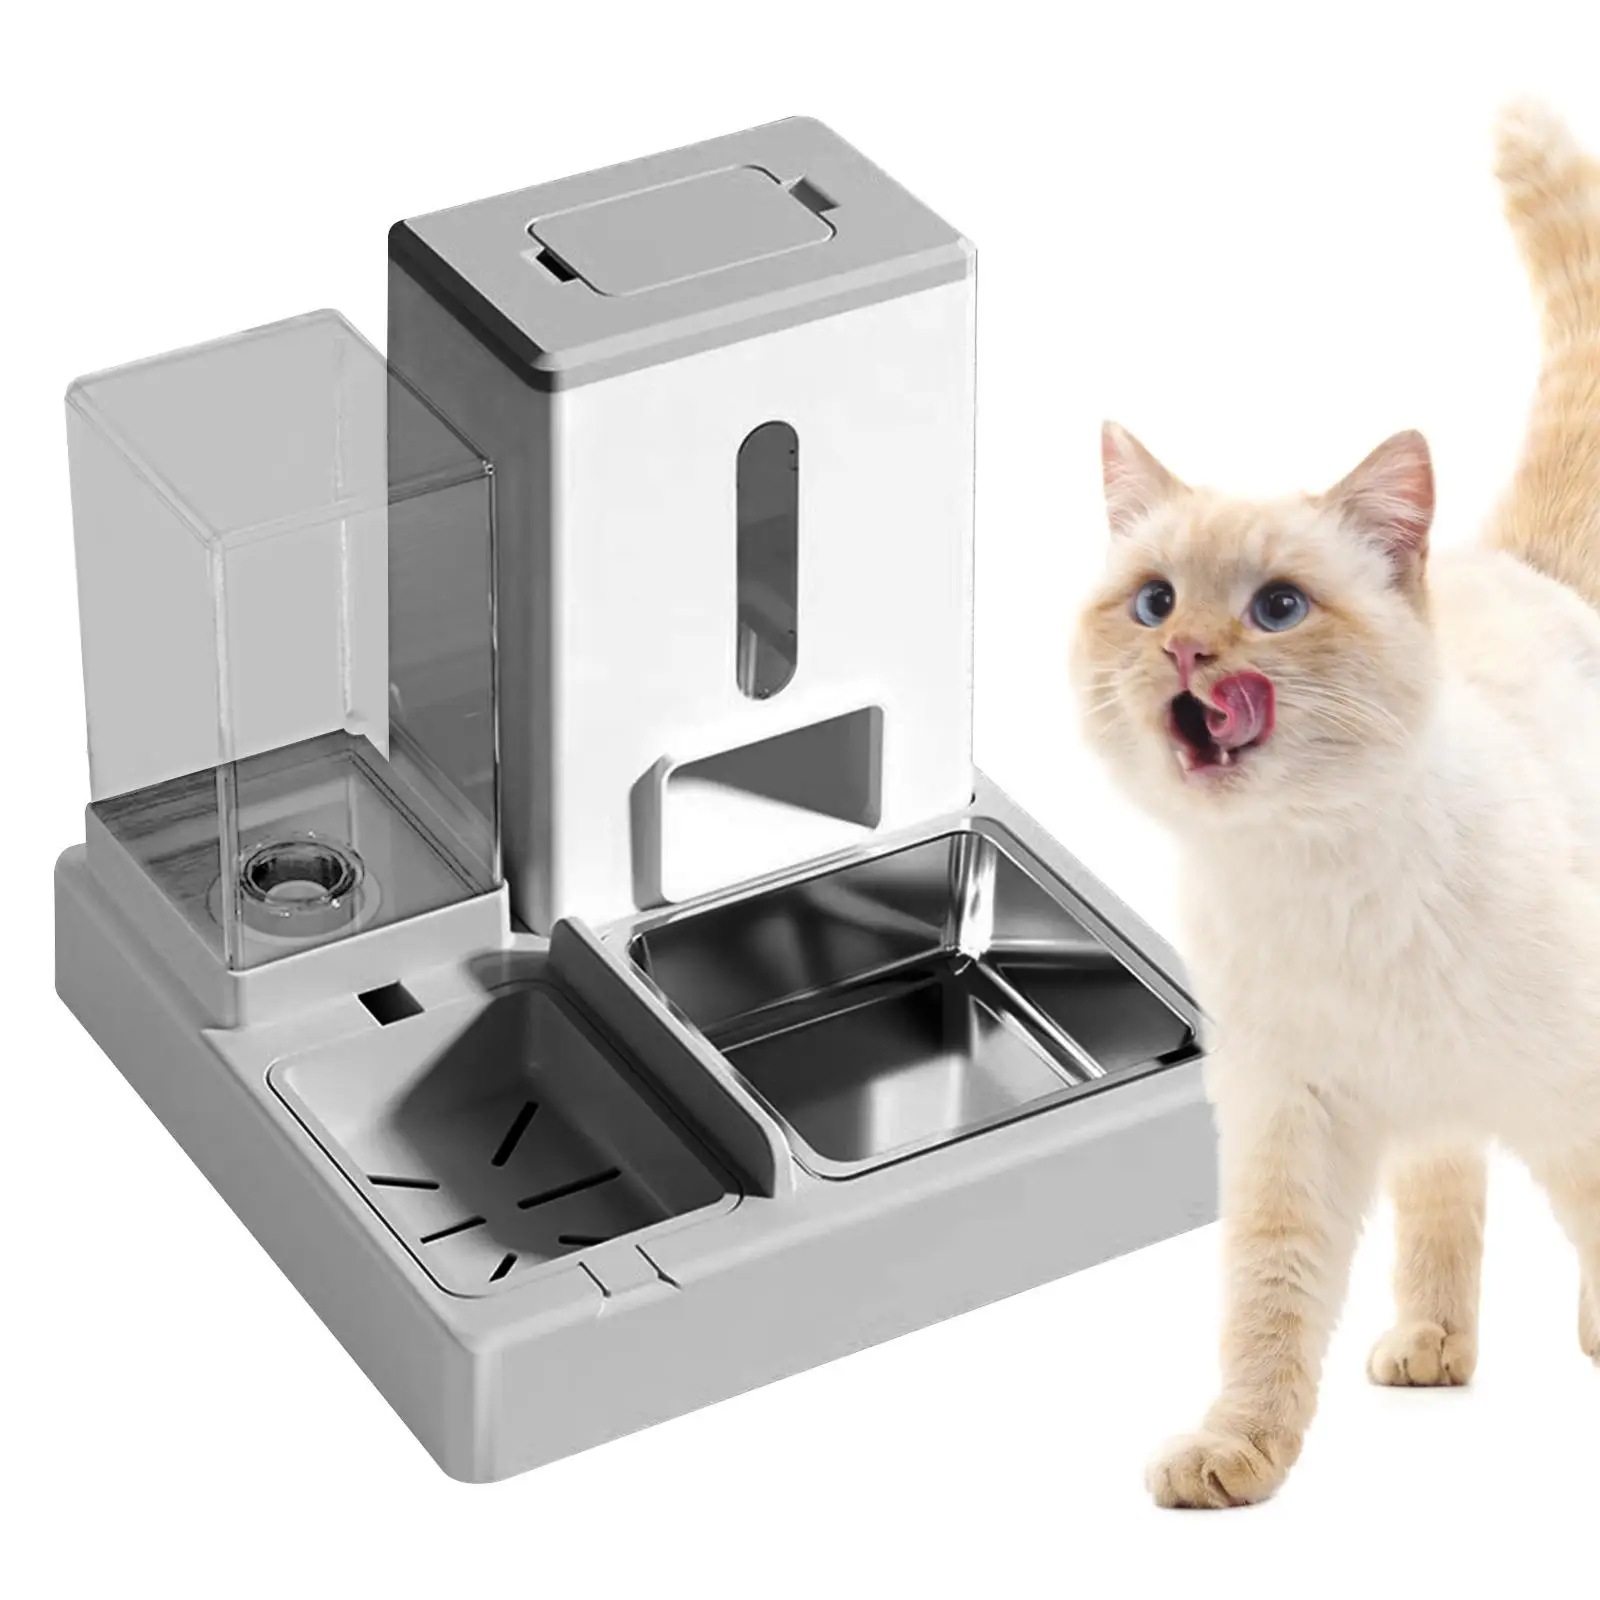 Cat Feeding Bowl and Water Dispenser Pet Feeder Cats Dog Water and Food Feeder for Medium Pet Dogs Small Animals Cats Puppy